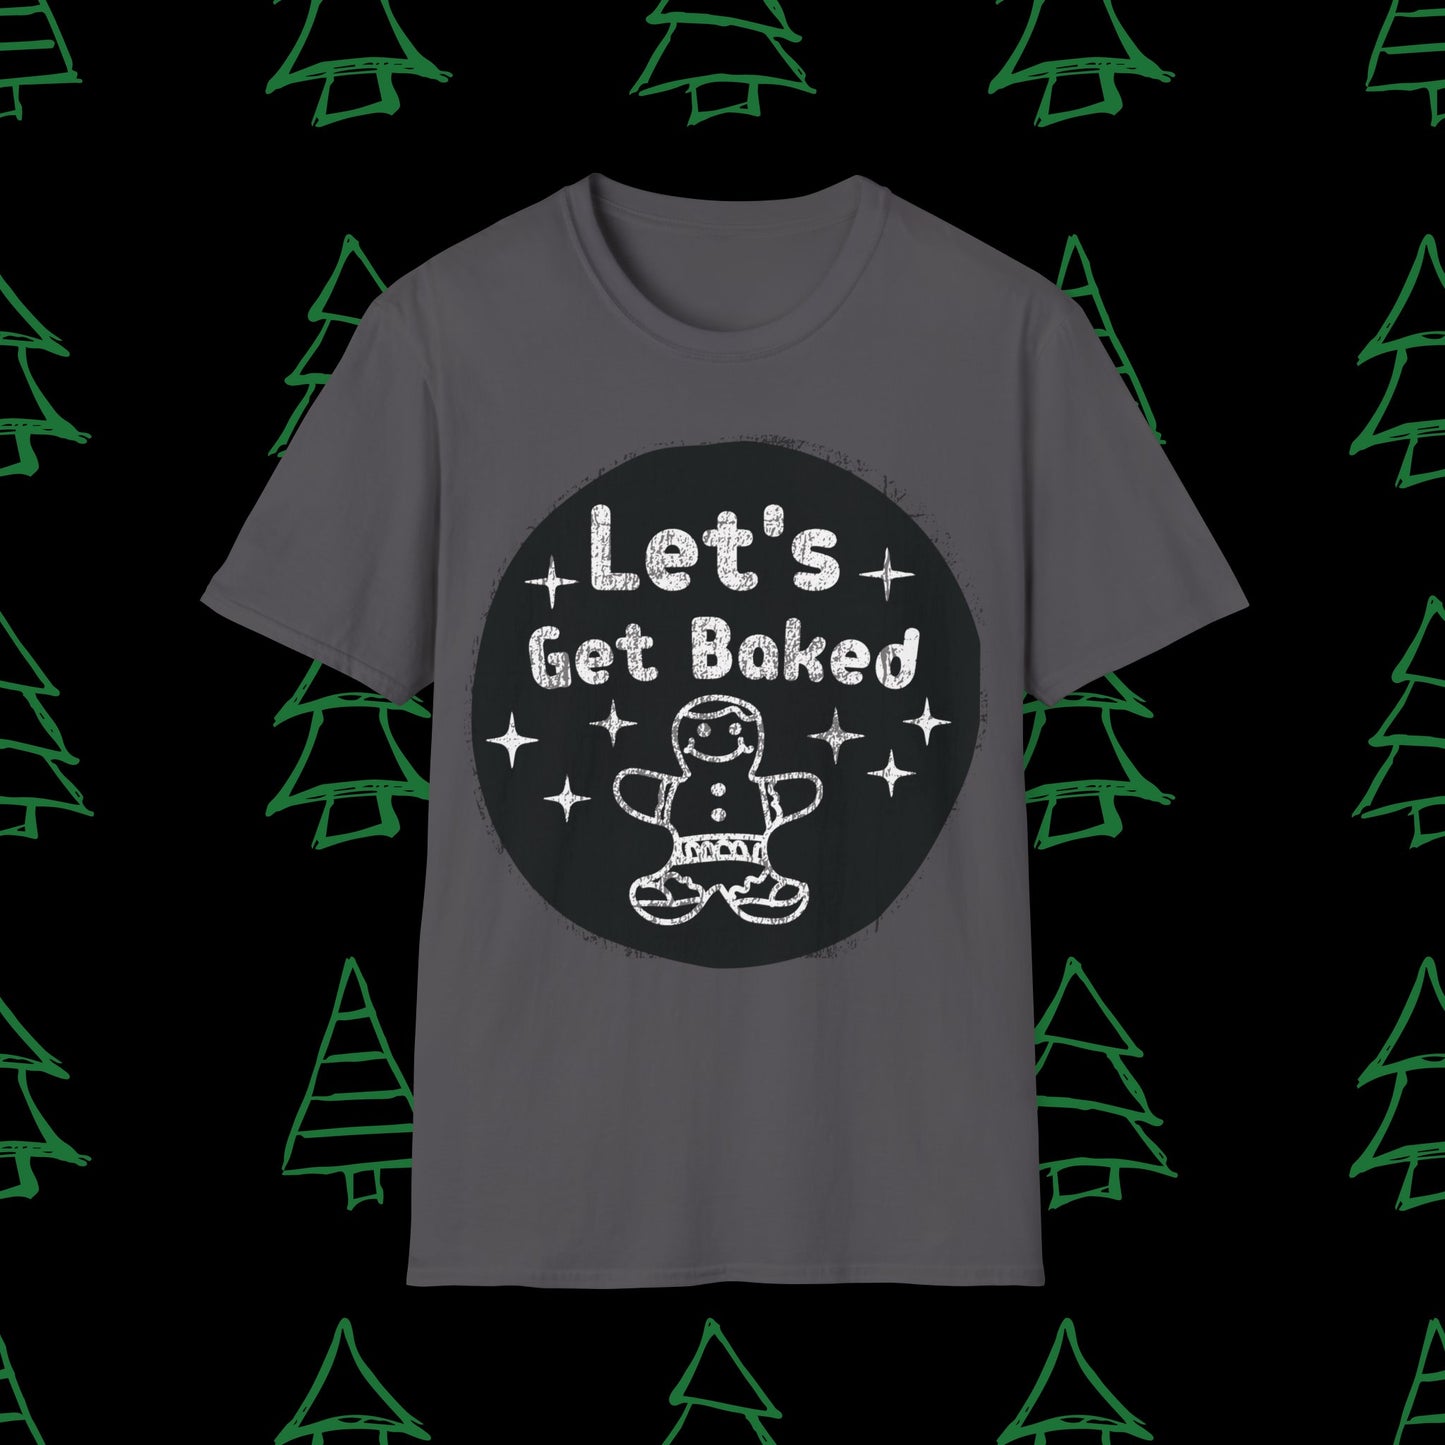 Christmas T-Shirt - Let's Get Baked - Mens Christmas Shirts - Adult Christmas TShirts T-Shirts Graphic Avenue Charcoal Adult Small 